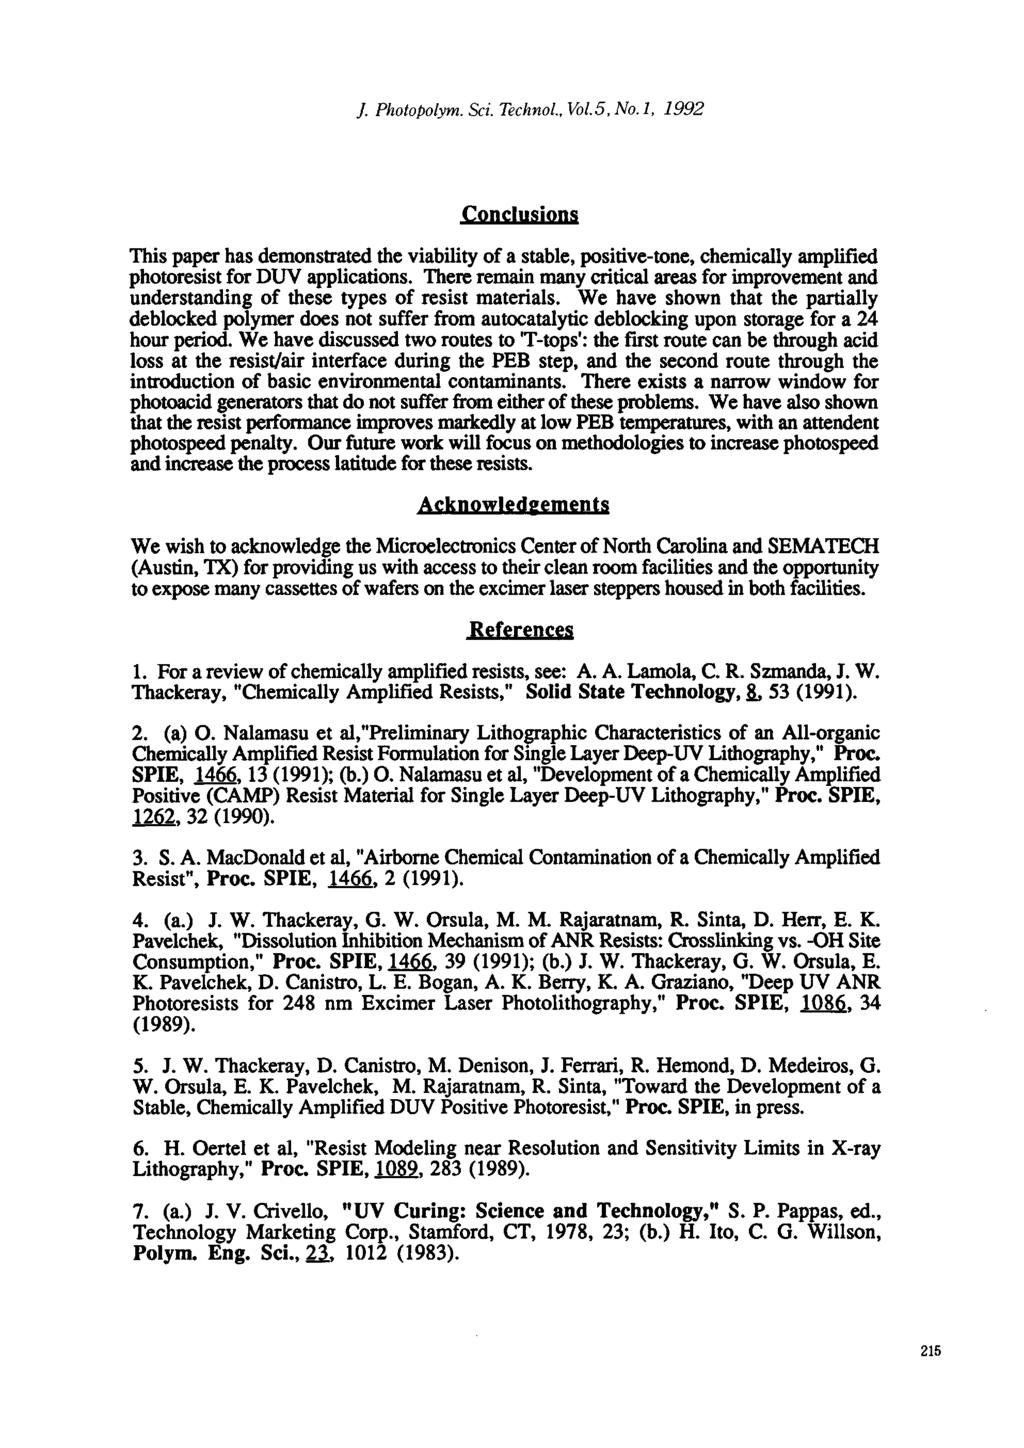 J. Photopolym. Sc2. Technol., Vol.5, No. 1, 1992 Conclusions This paper has demonstrated the viability of a stable, positive-tone, chemically amplified photoresist for DUV applications.